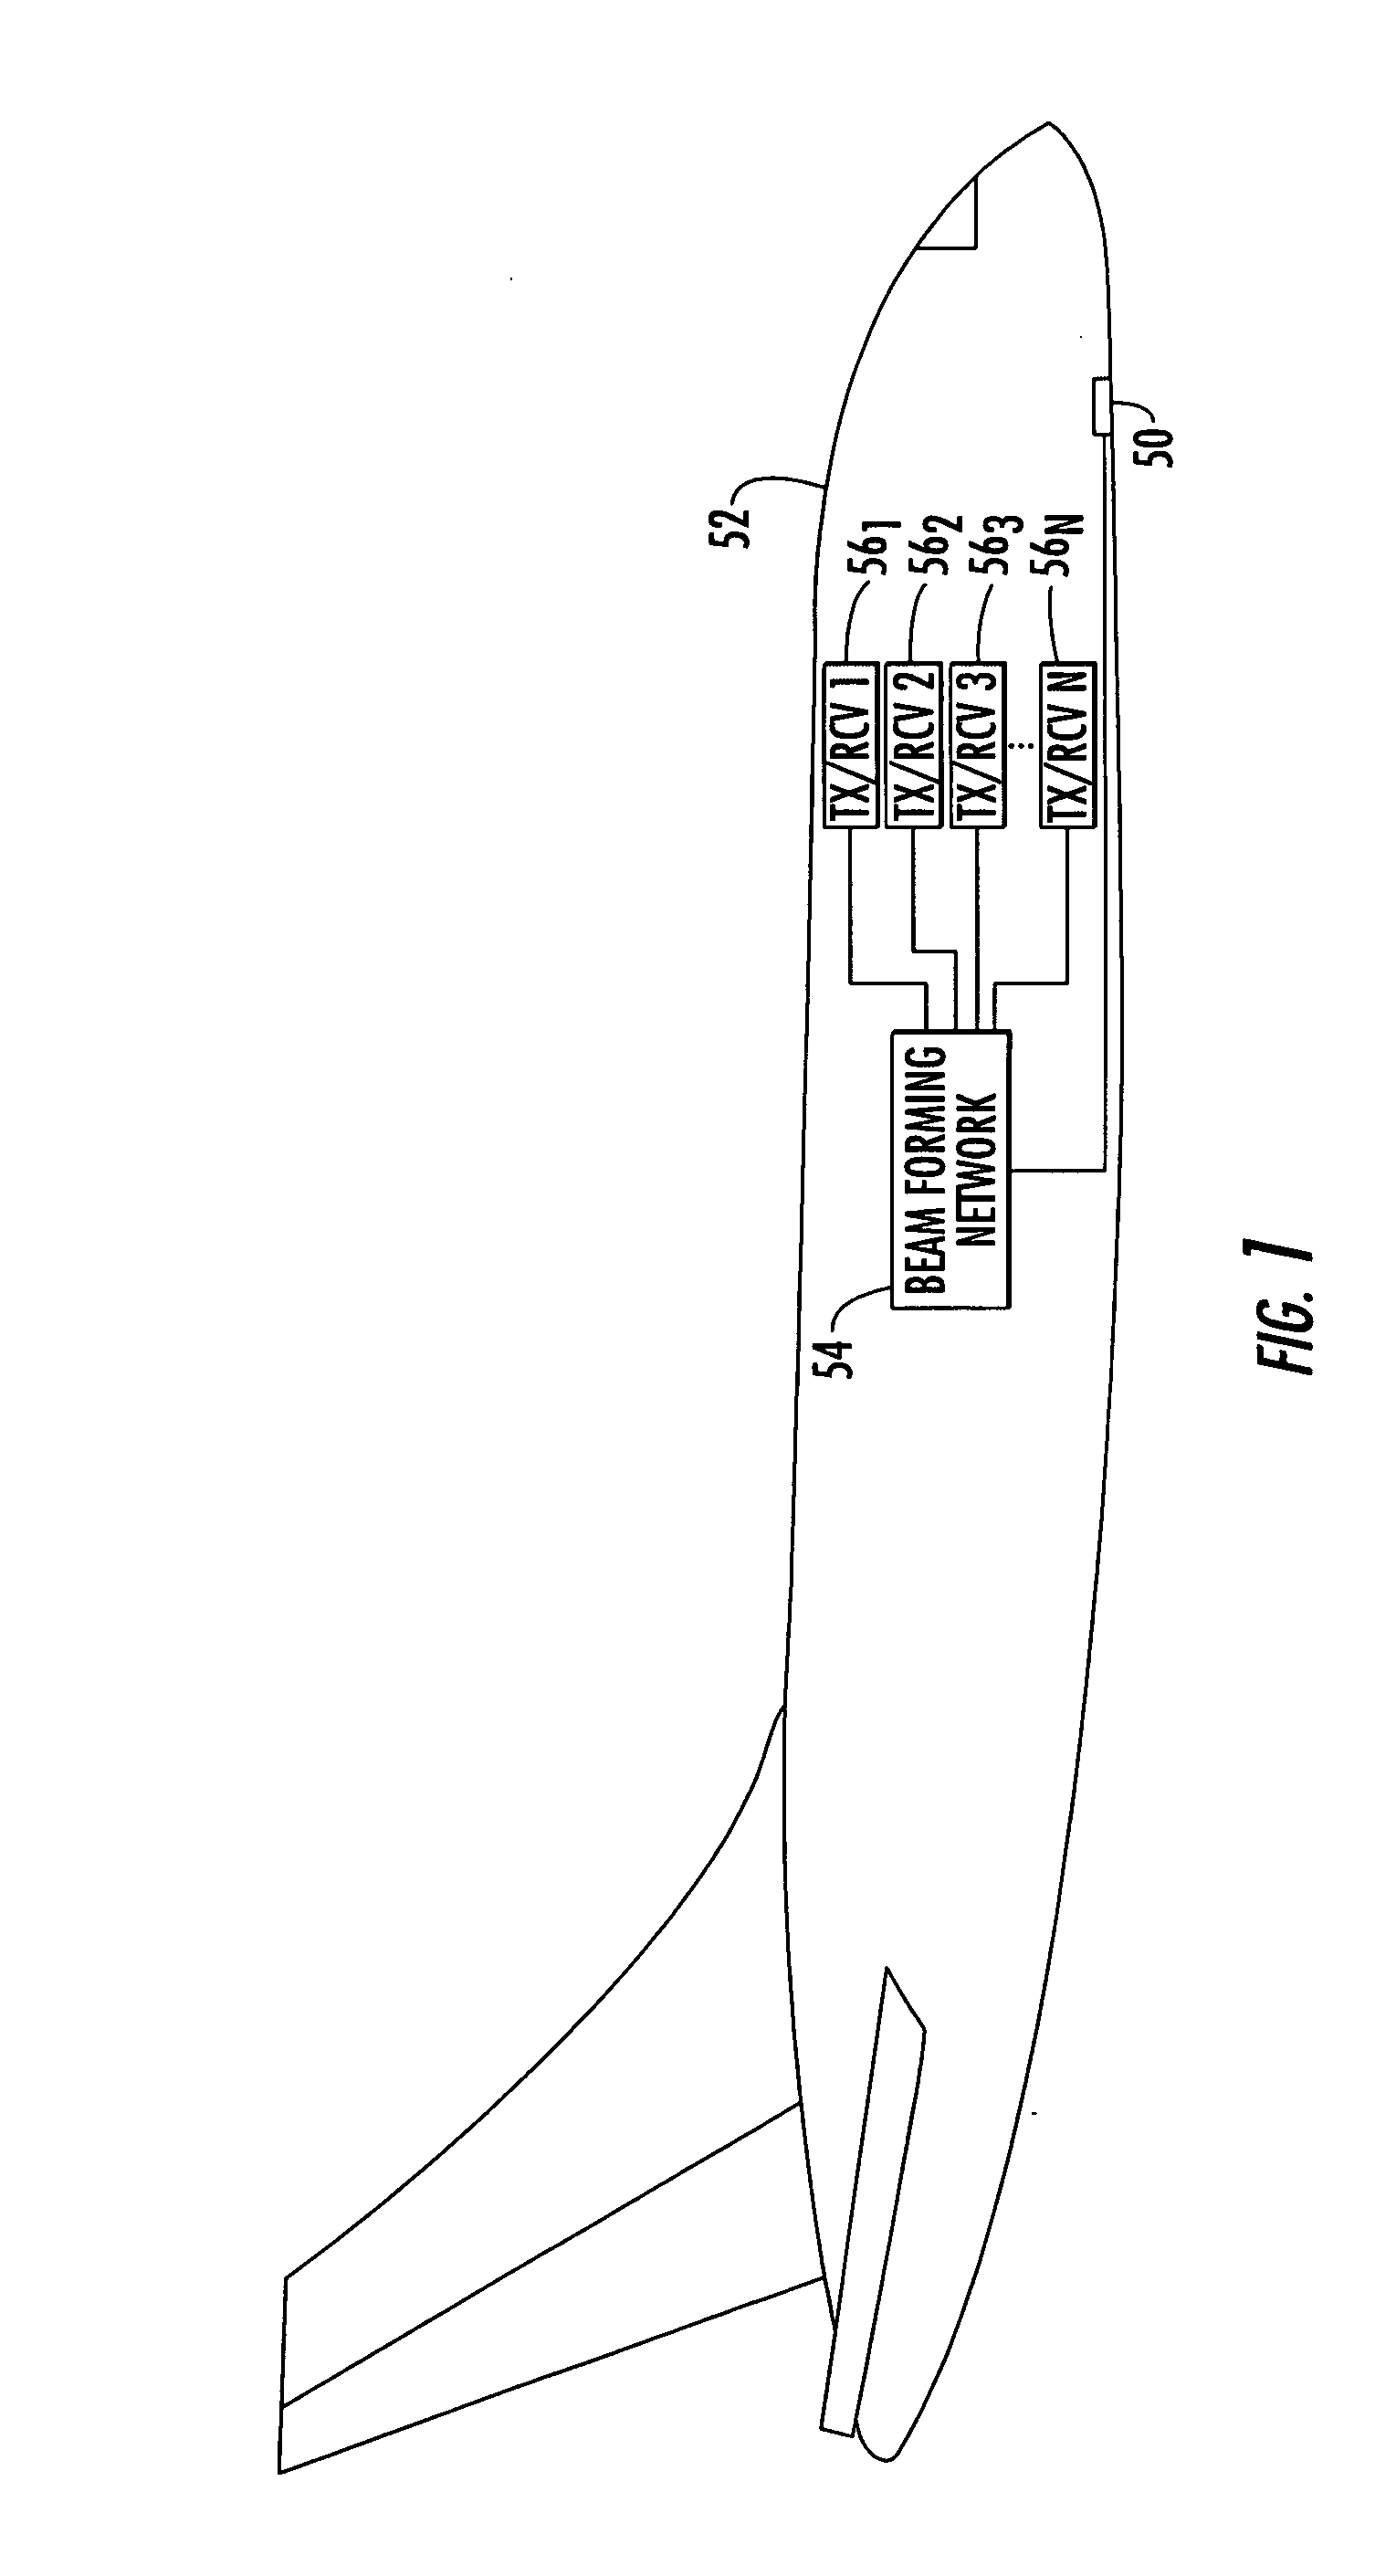 Multiband polygonally distributed phased array antenna and associated methods